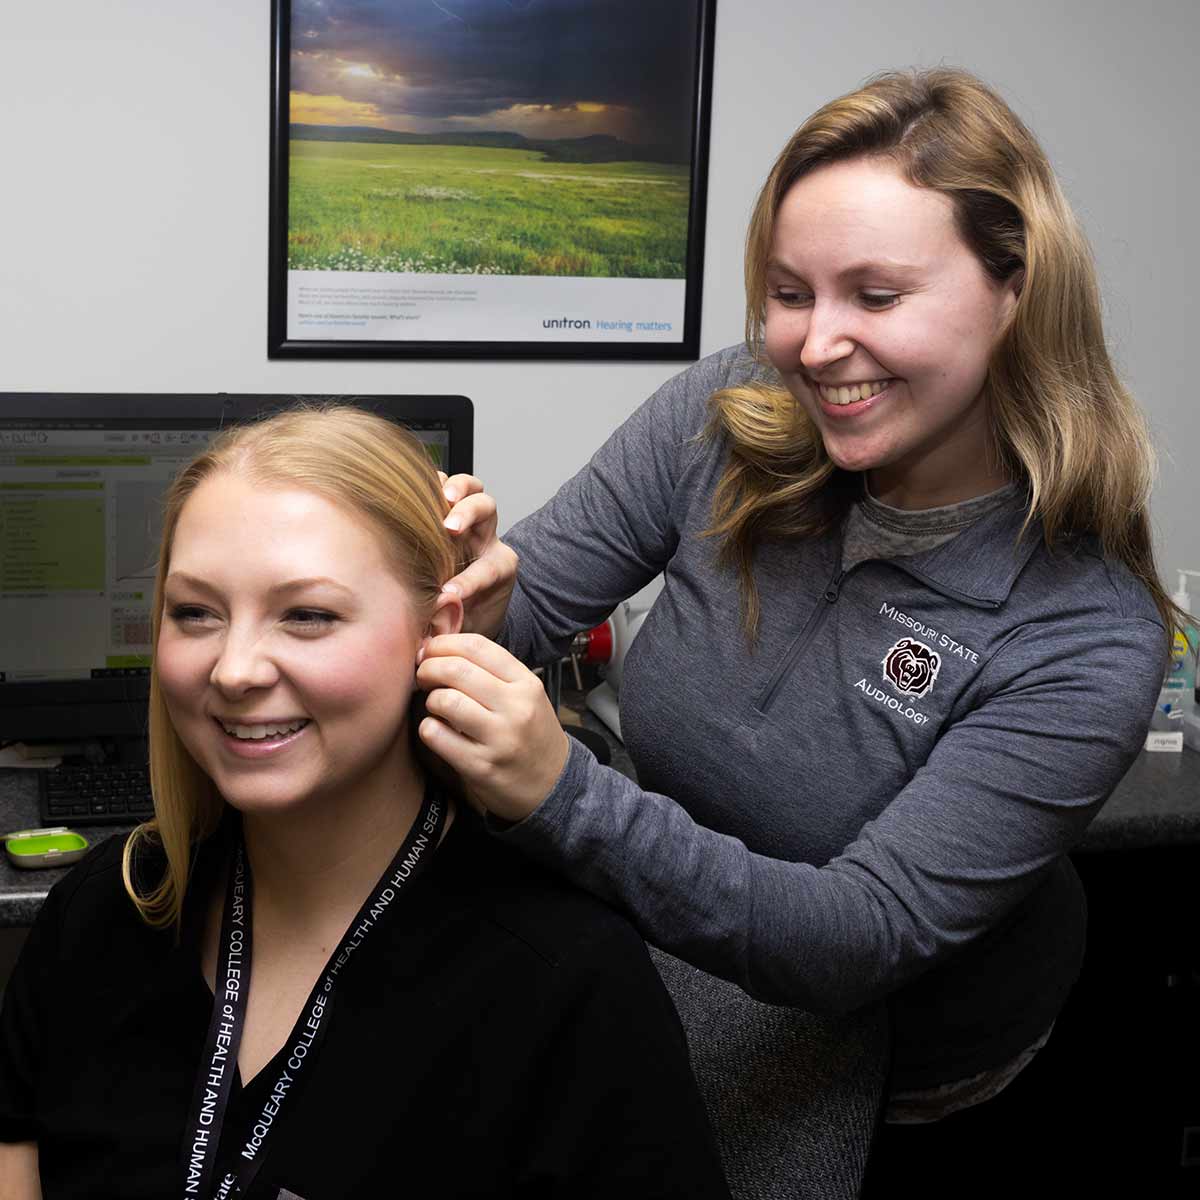 An audiology student demonstrates how to insert a hearing aid on a patient. Her patient is another student.